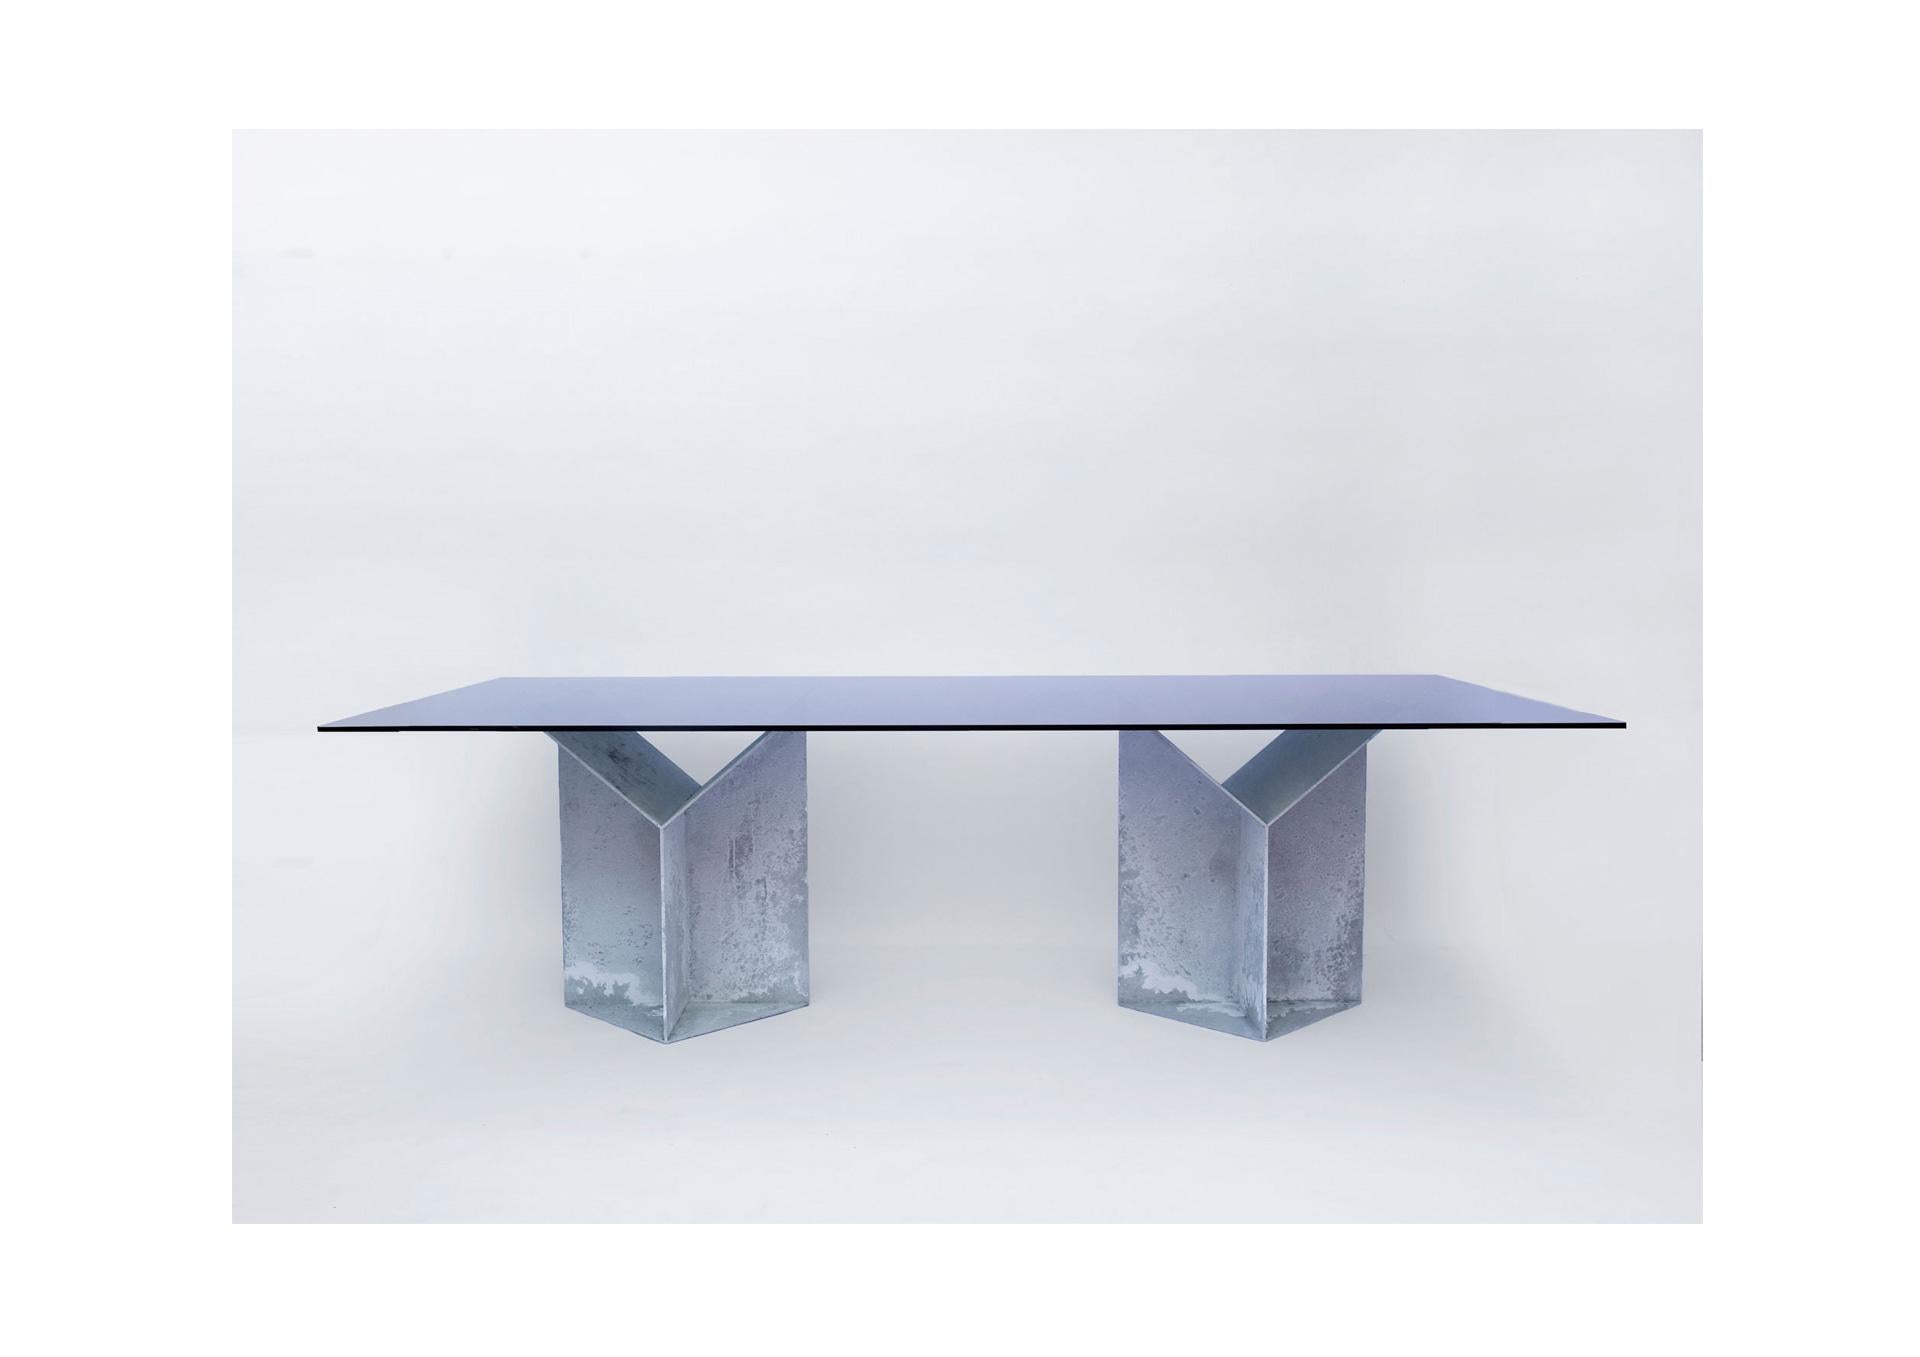 Pinac dining table by Oeuffice
Edition: 12 + 2AP
2015
Materials: Aluminum, tempered glass
Dimensions: L 220 x W 105 x H 72 cm

It is possible to customize the objects with different finishes of aluminium (brushed, oxidized red, oxidized blue